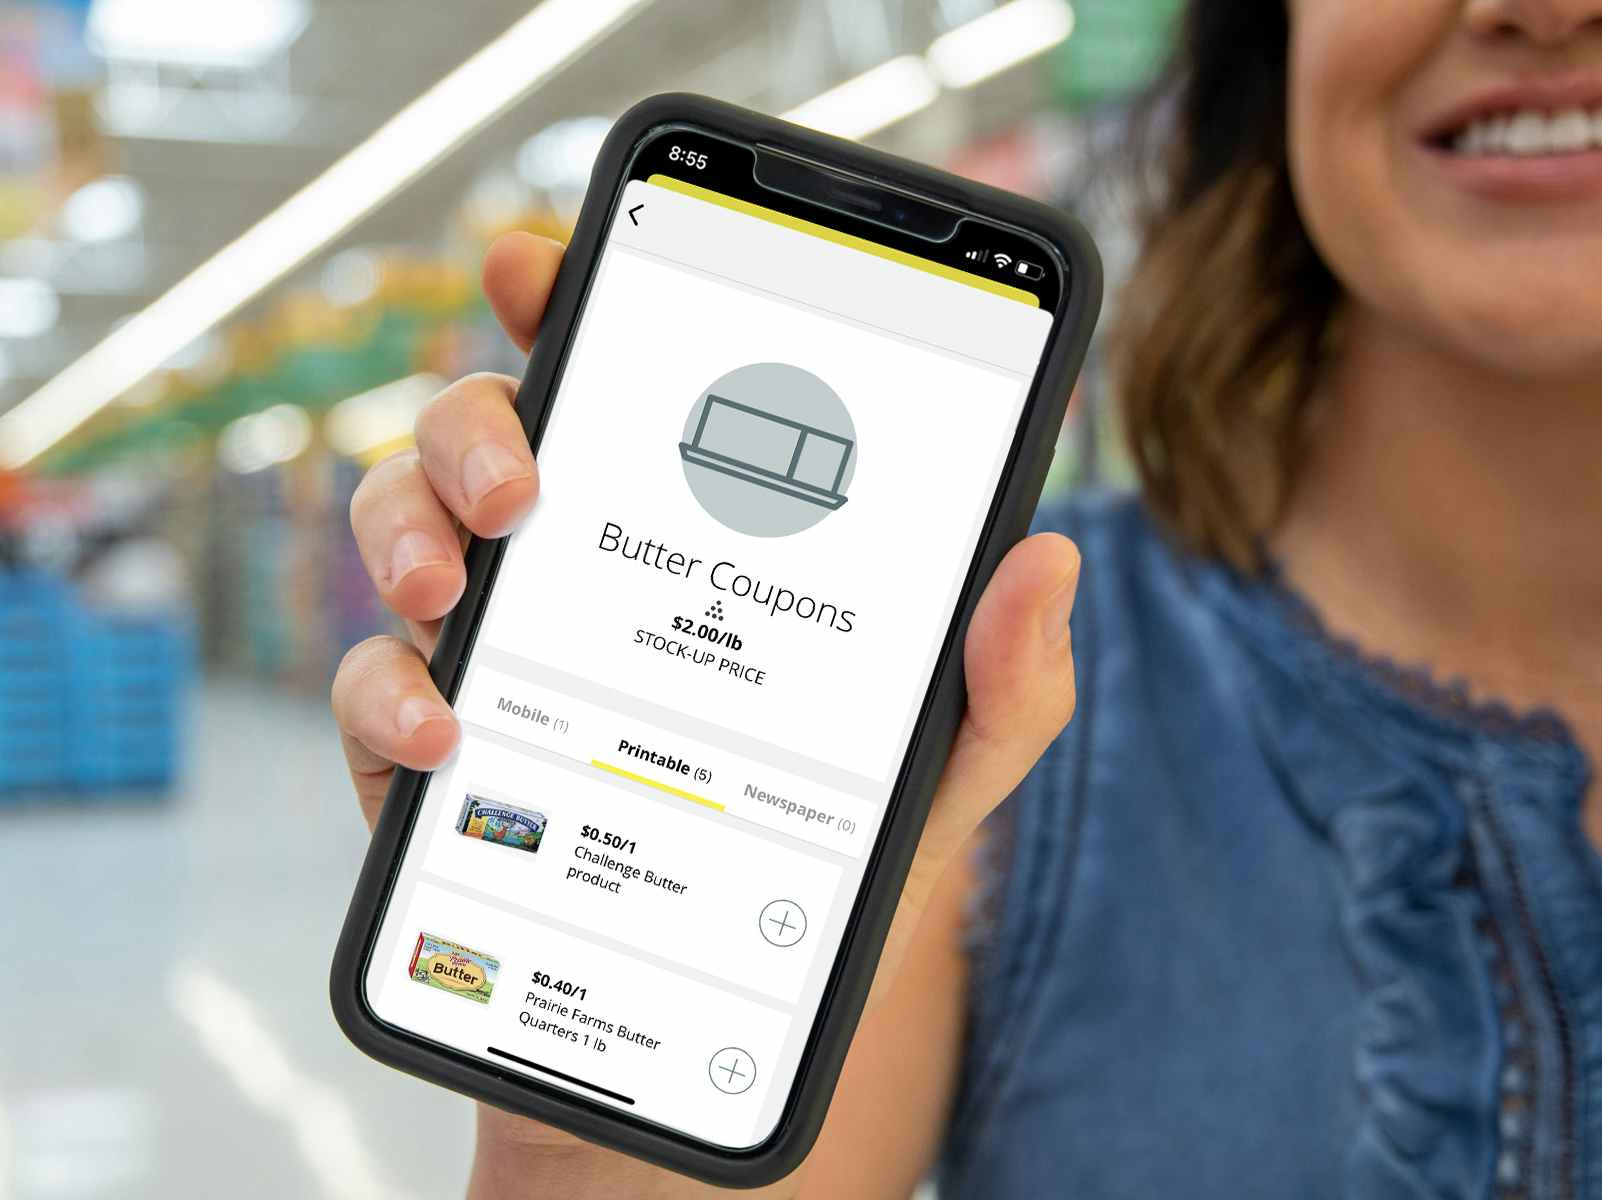 A person holding up a cell phone displaying the butter coupons on the KCL mobile app